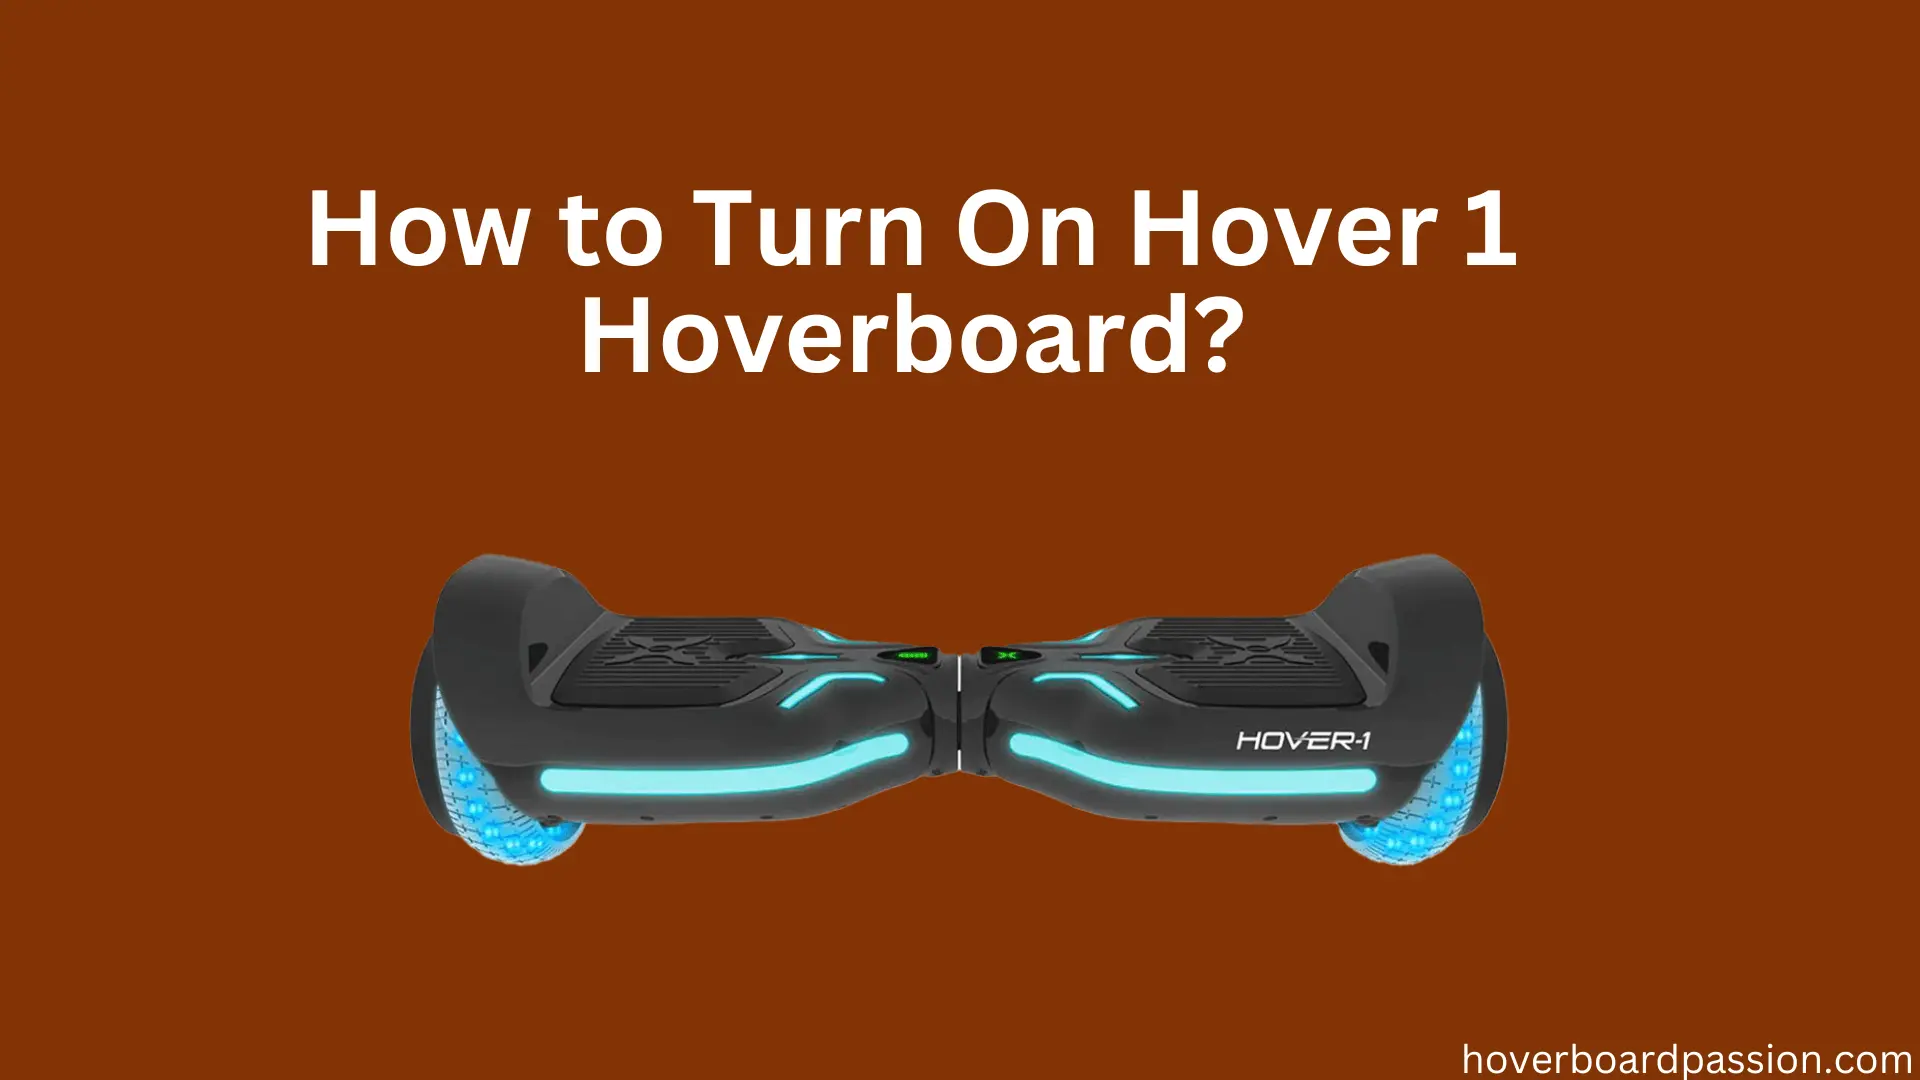 How to Turn On Hover 1 Hoverboard?